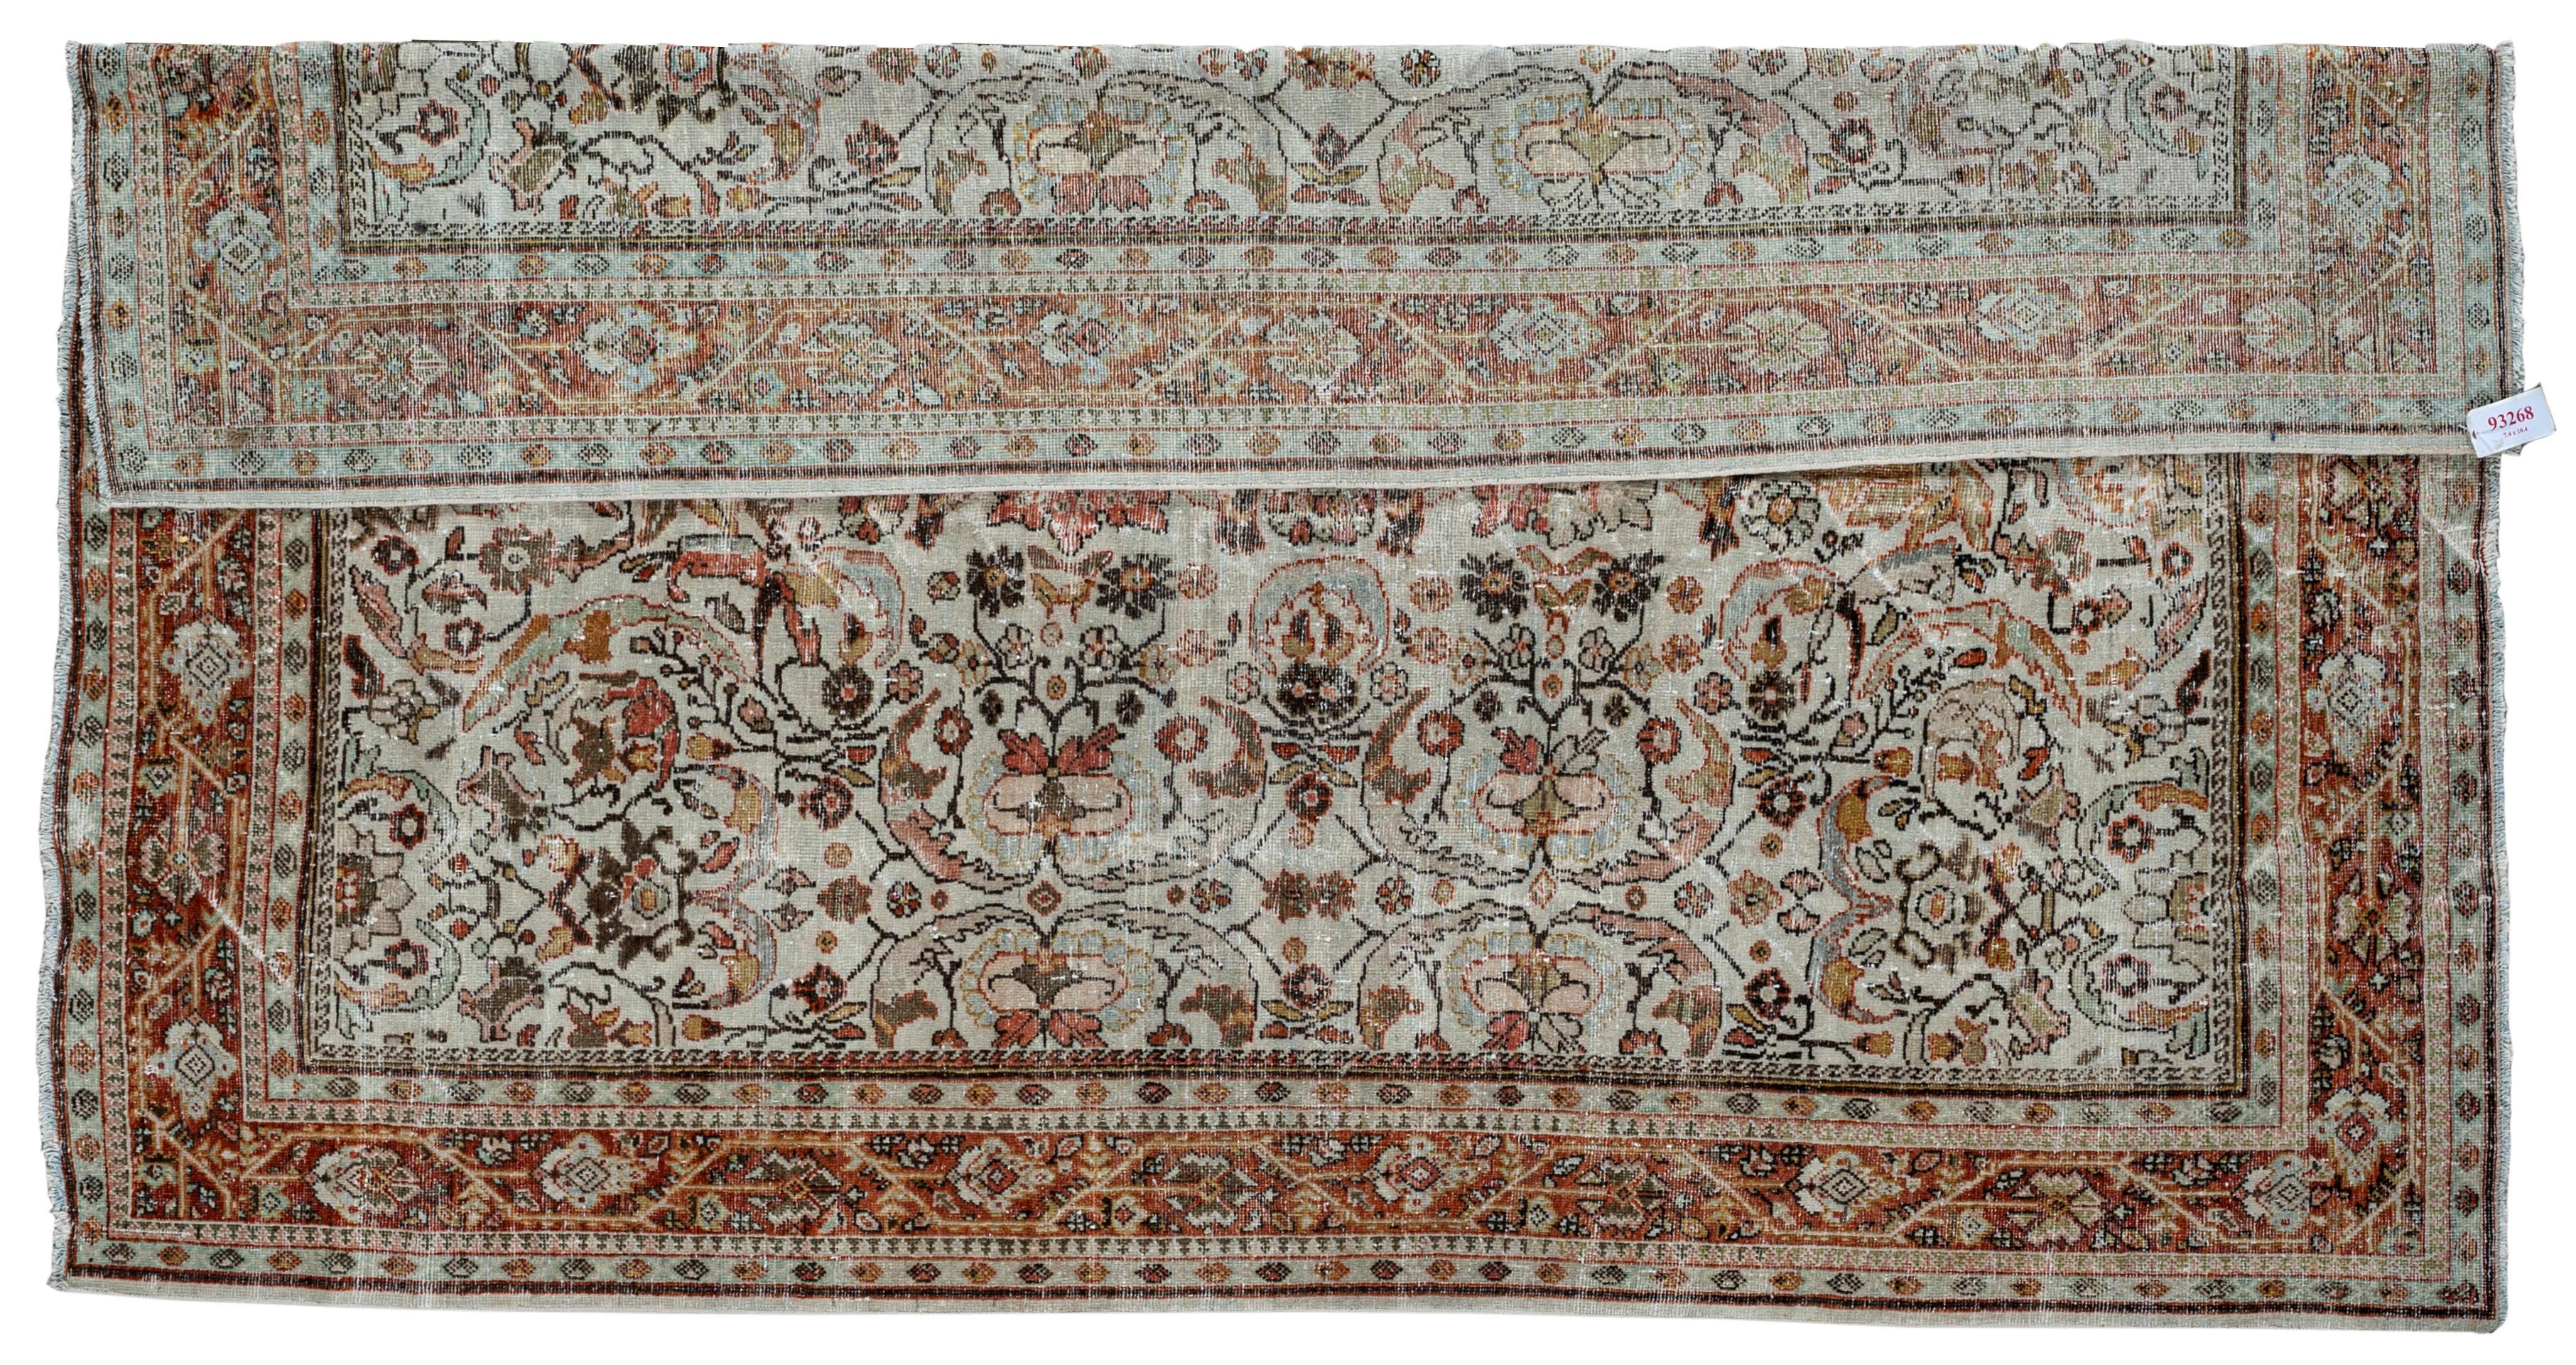 This antique distressed mahal is an all wool Handmade and Hand knotted rug. This distinctive area rug that has an all over design and wide stylized floral frame is from the 20th century and was made in Iran. The name is derived from the Mahallat